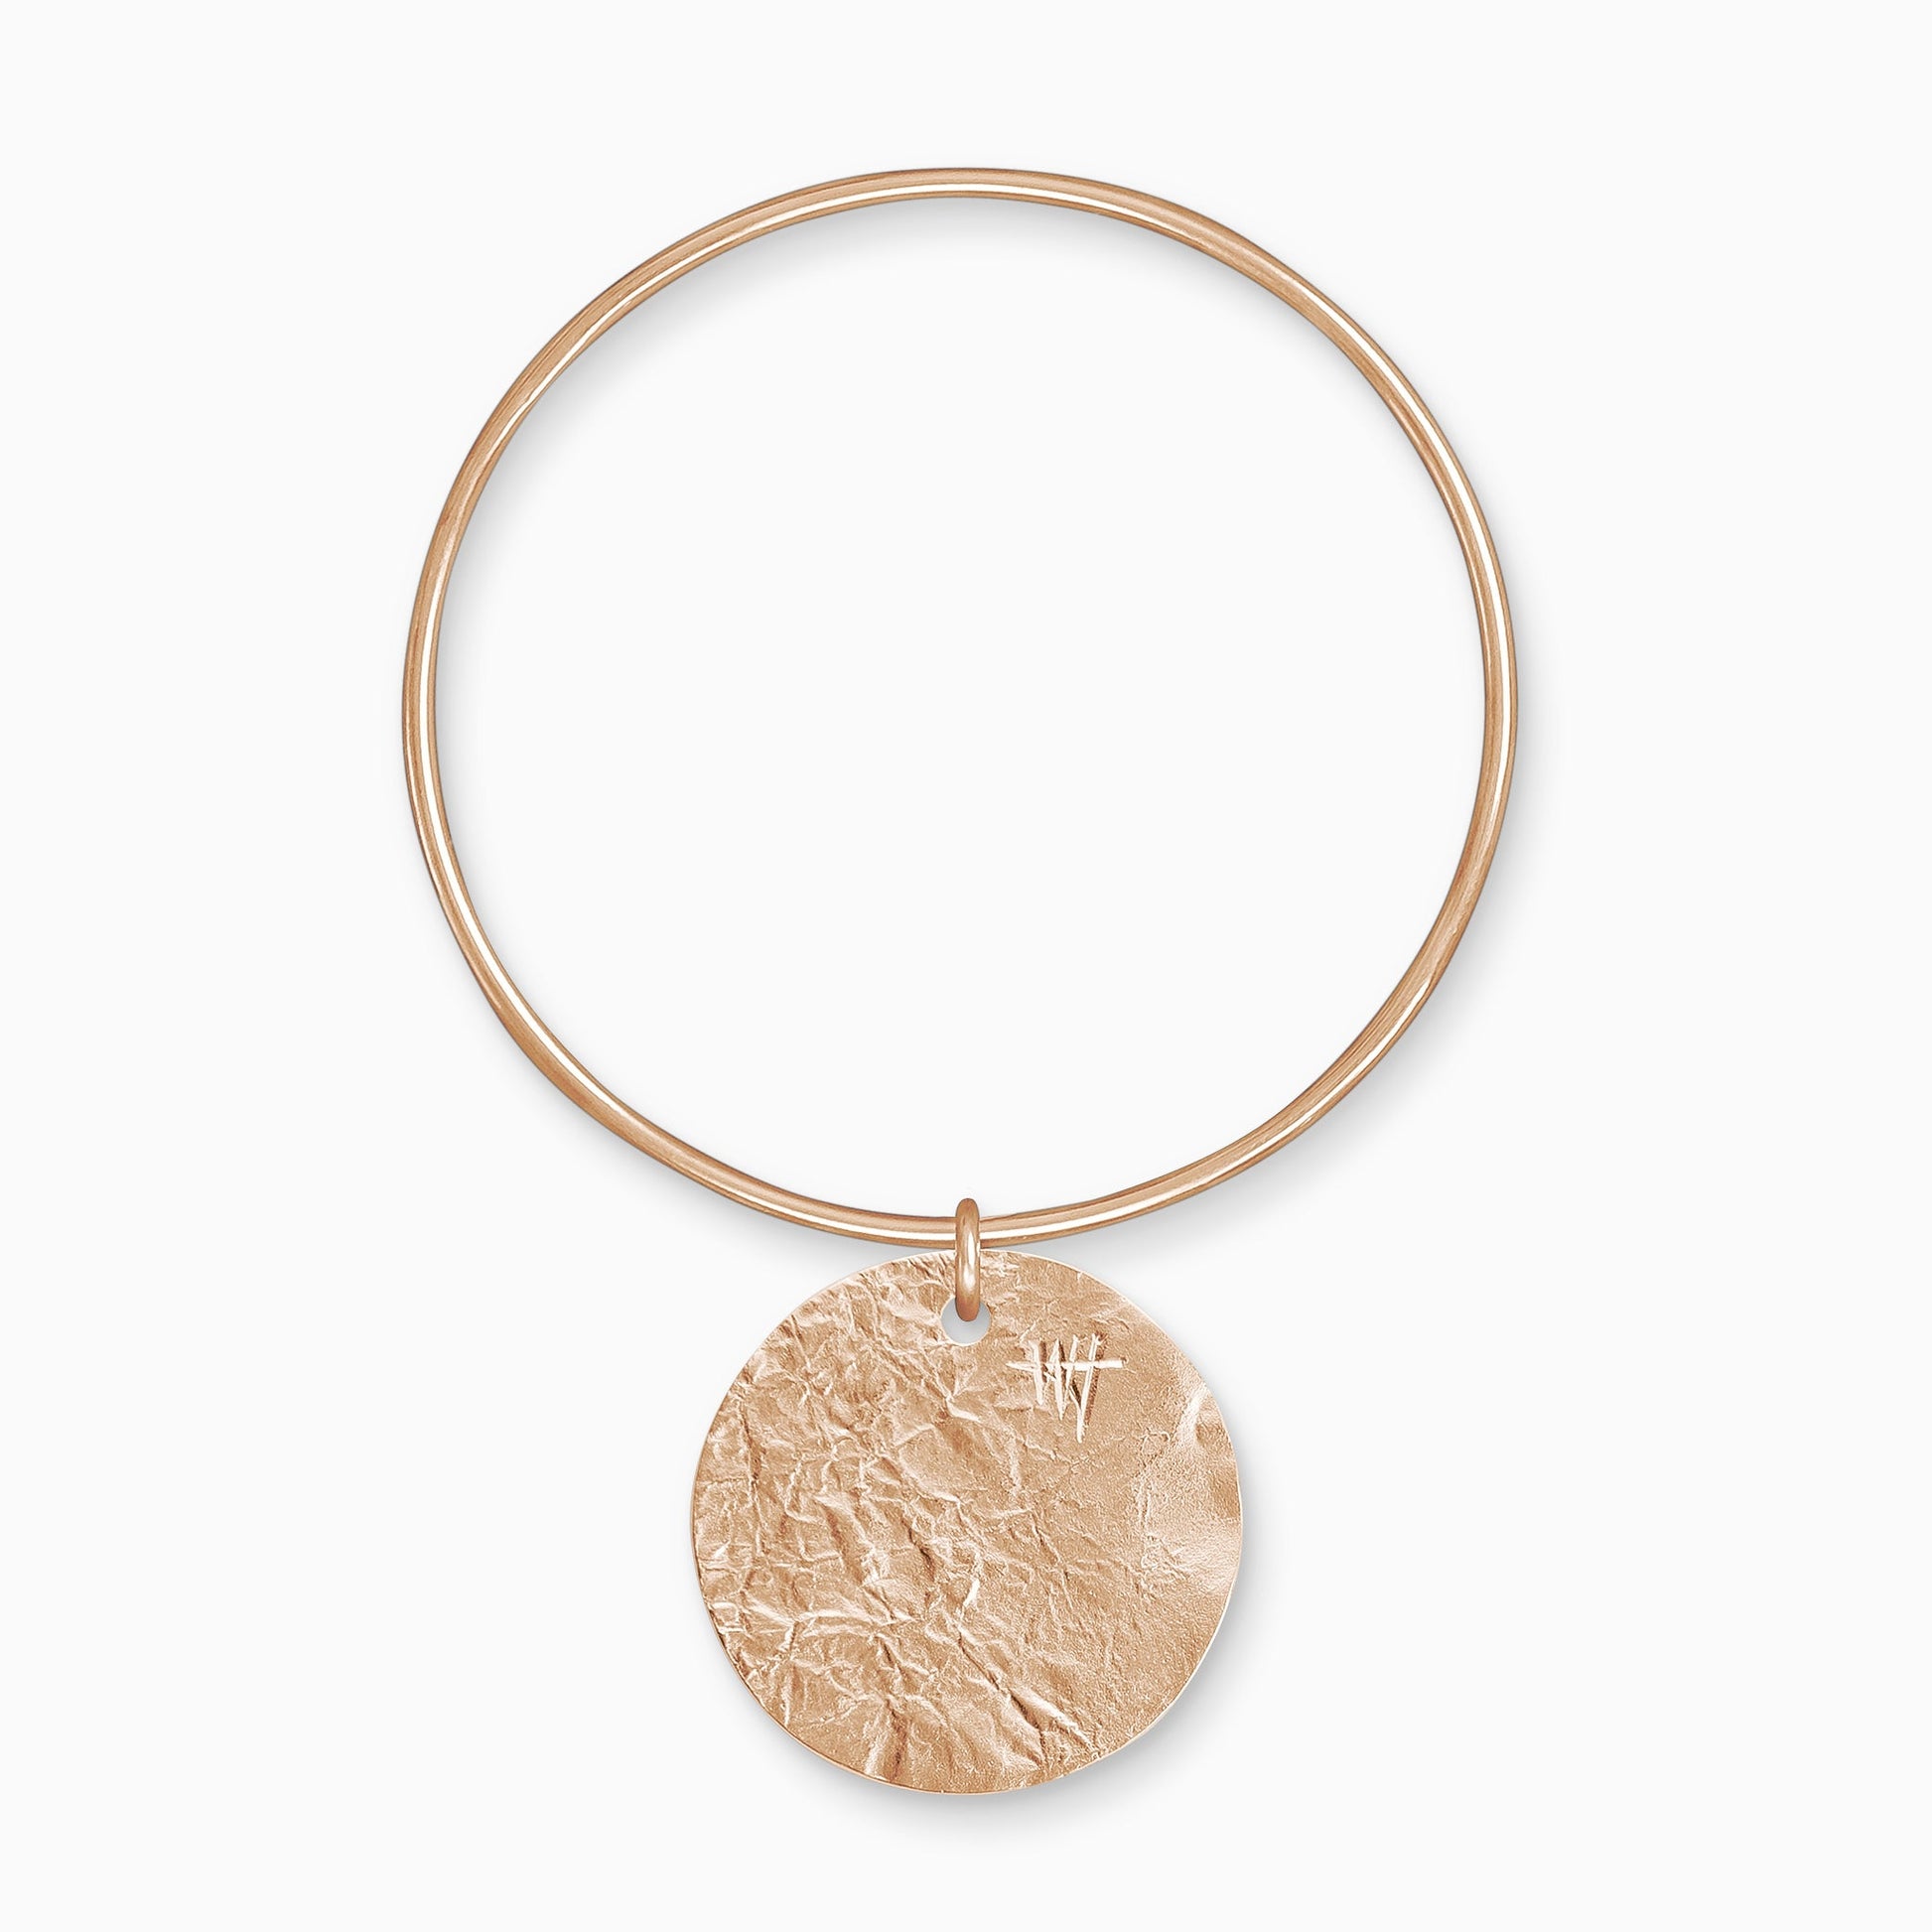 An 18ct Fairtrade rose gold Textured, circular, flat disc charm freely moving on a round wire bangle. Charm 35mm. Bangle 63mm x 2mm.